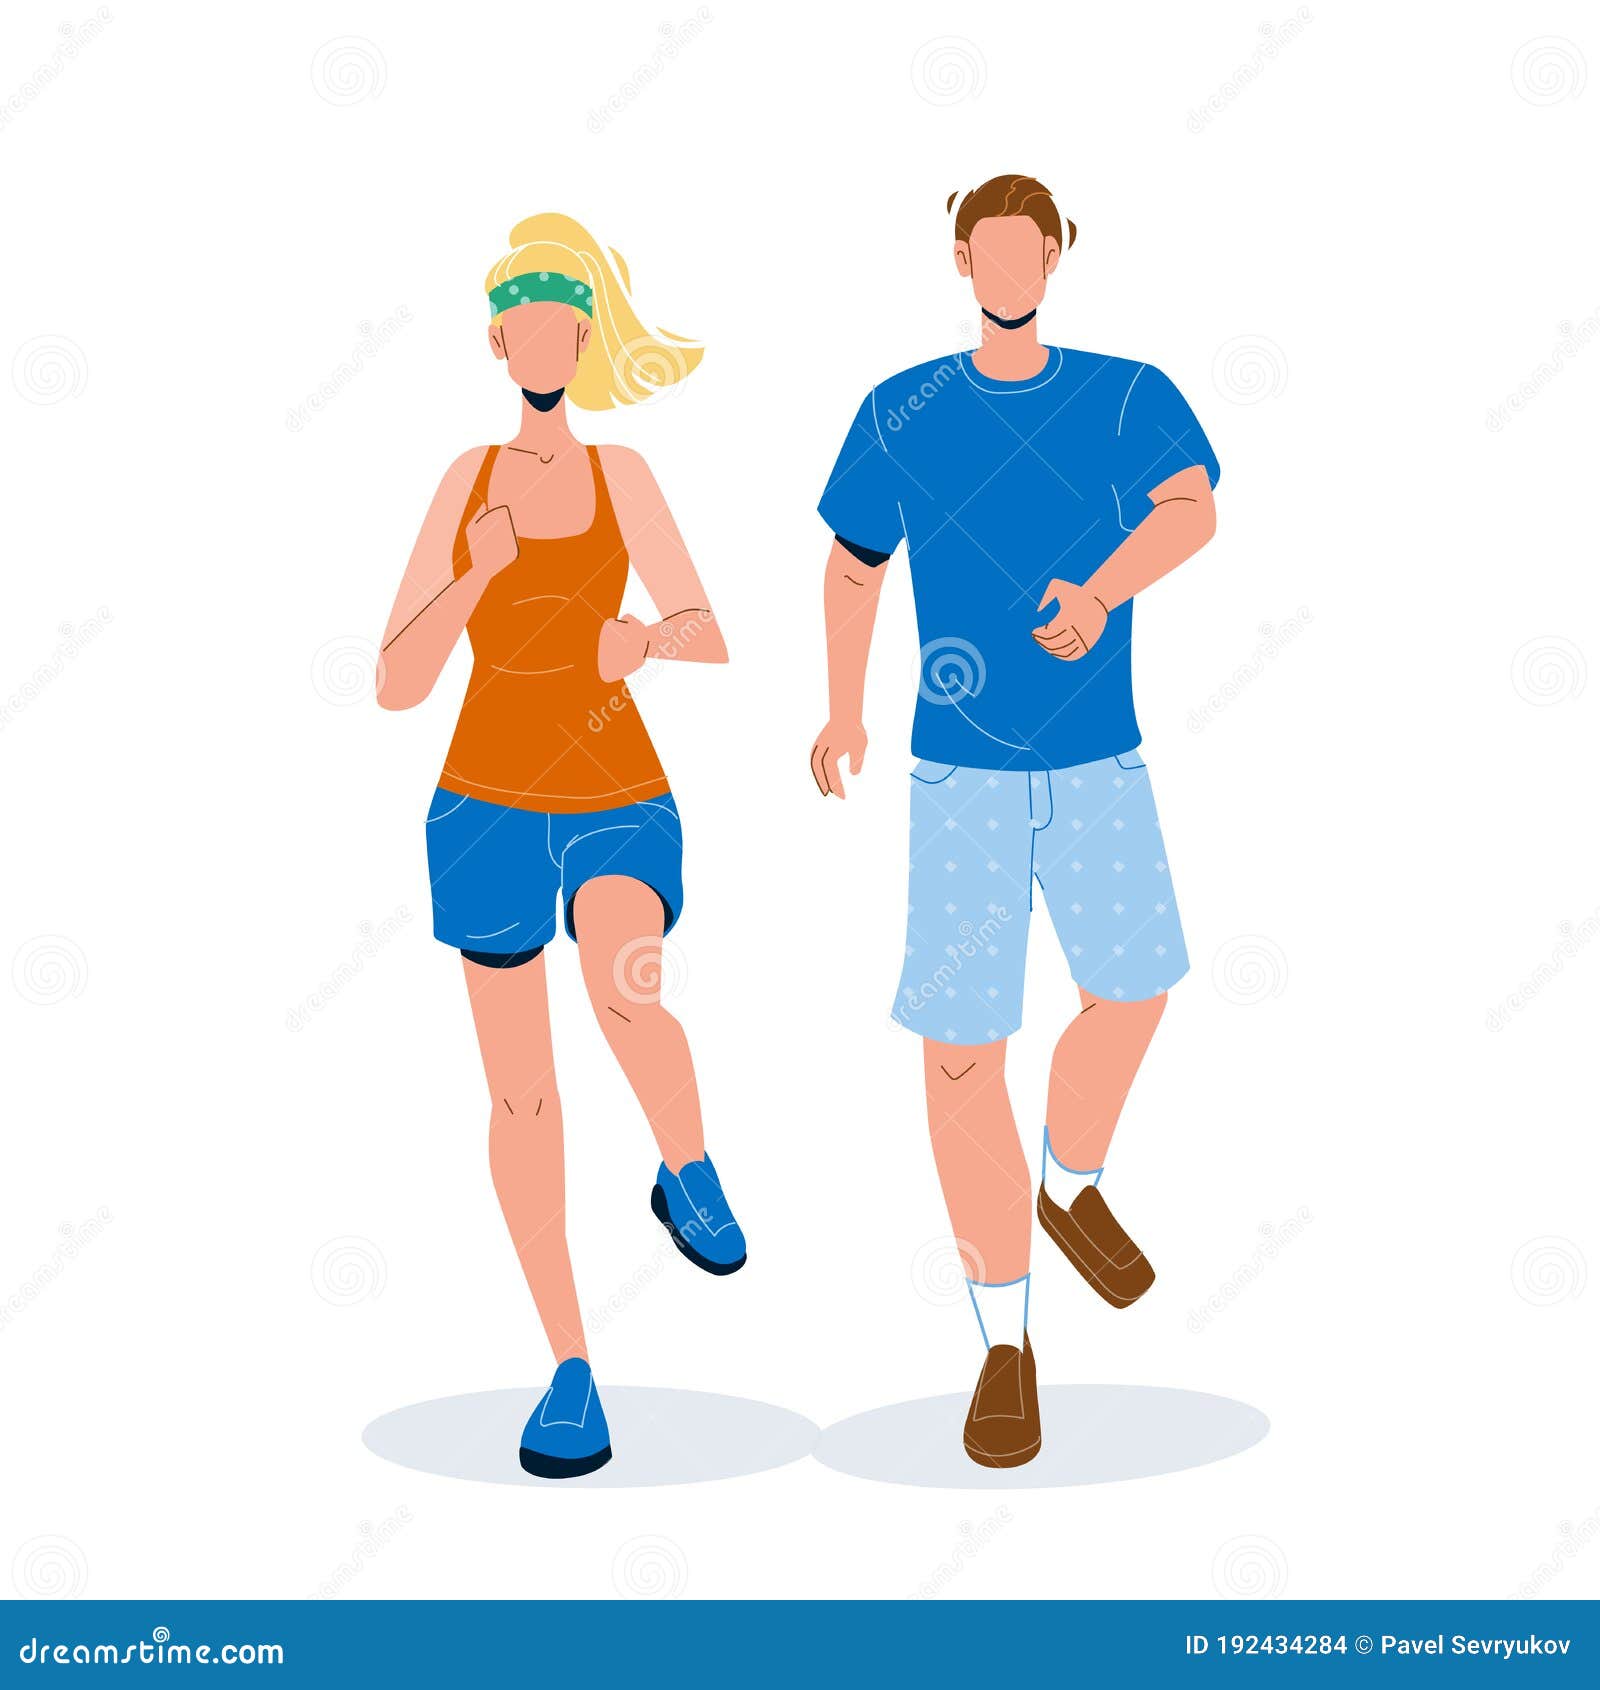 Joggers Man and Woman Running Together Vector Stock Vector ...